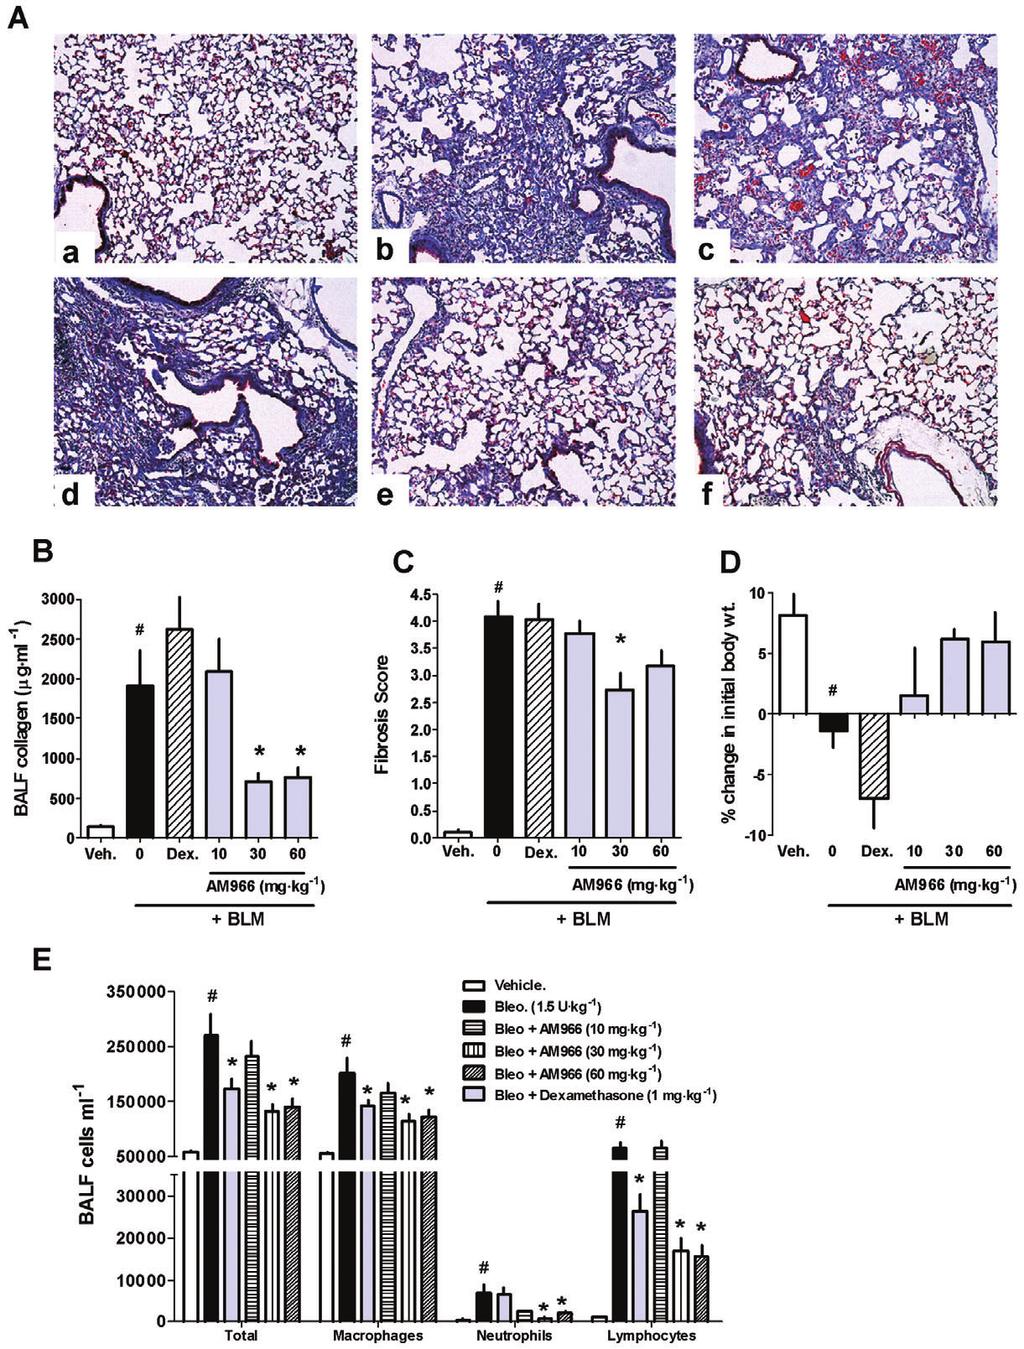 JS Swaney et al 1707 Figure 6 AM966 inhibits lung fibrosis and maintains body weight 14 days after bleomycin-induced lung injury. Mice were given intratracheal bleomycin sulfate (BLM; 1.